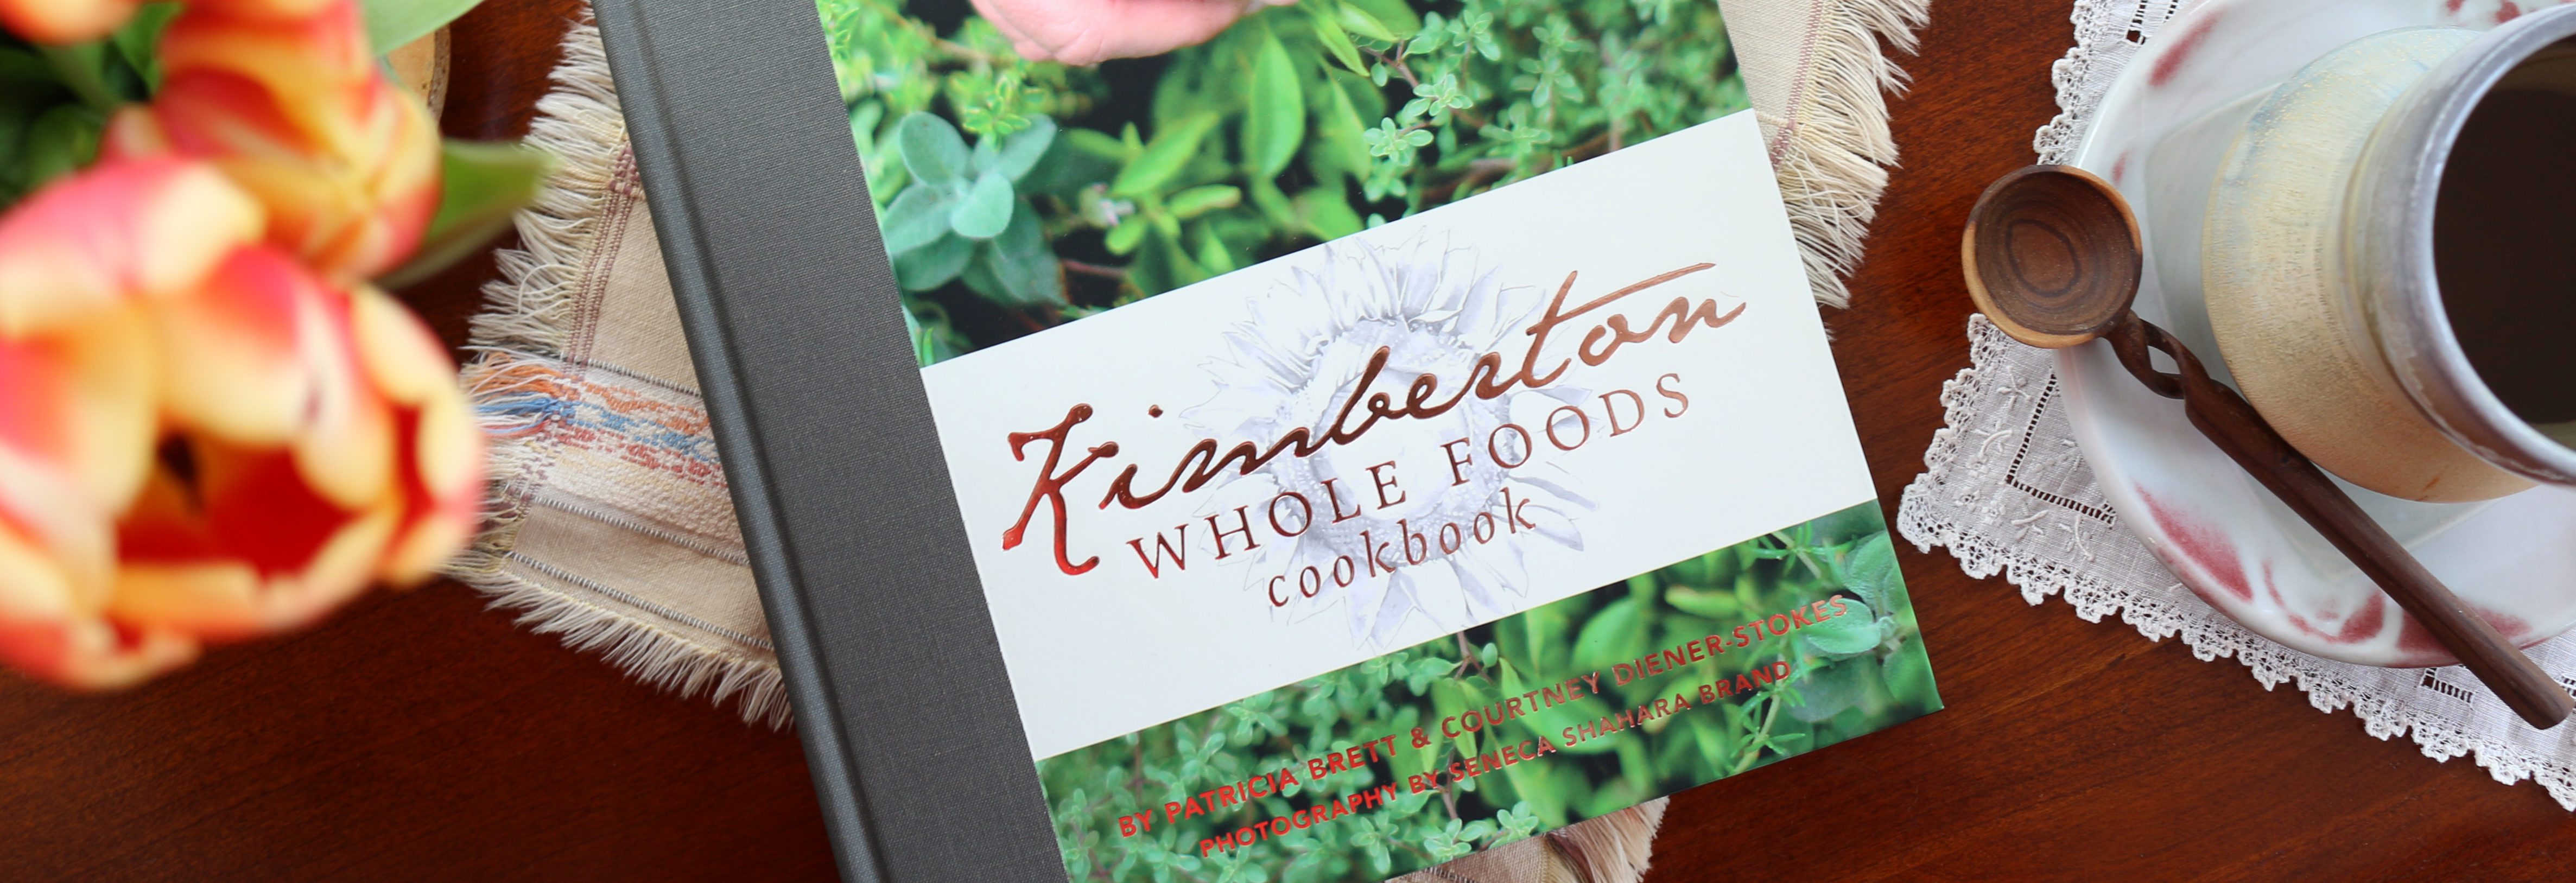 Kimberton Whole Foods Cookbook: A Family History with Recipes